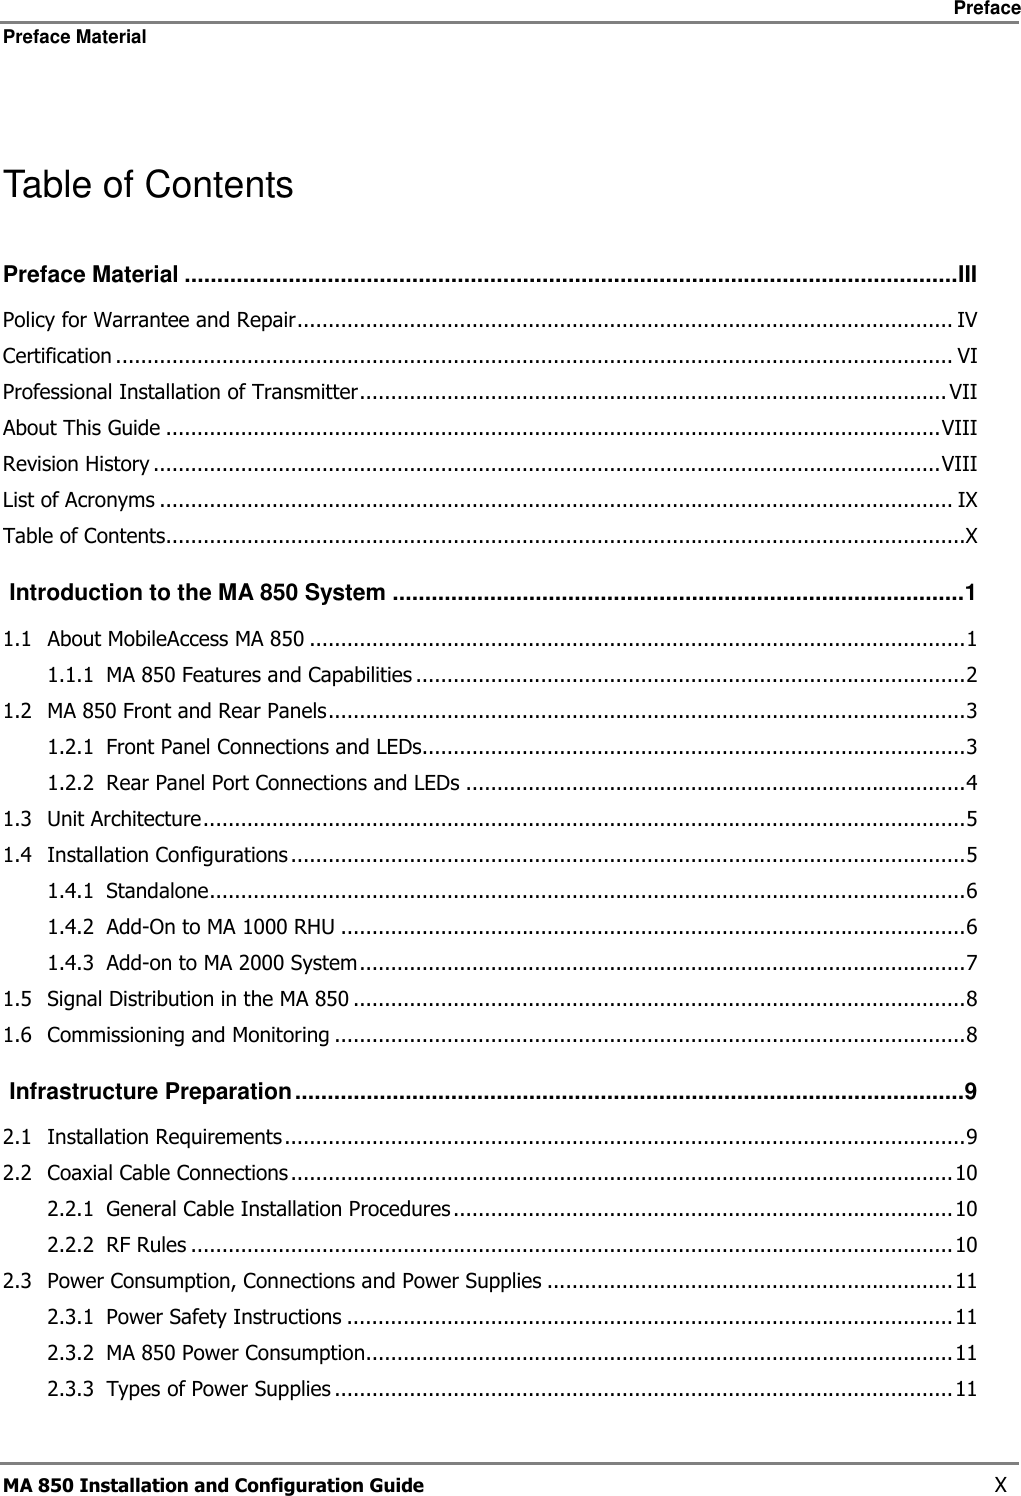     Preface Preface Material      MA 850 Installation and Configuration Guide    X  Table of Contents Preface Material .......................................................................................................................III Policy for Warrantee and Repair......................................................................................................... IV Certification ...................................................................................................................................... VI Professional Installation of Transmitter..............................................................................................VII About This Guide ............................................................................................................................VIII Revision History ..............................................................................................................................VIII List of Acronyms ............................................................................................................................... IX Table of Contents................................................................................................................................X  Introduction to the MA 850 System ........................................................................................1 1.1 About MobileAccess MA 850 .........................................................................................................1 1.1.1 MA 850 Features and Capabilities ........................................................................................2 1.2 MA 850 Front and Rear Panels......................................................................................................3 1.2.1 Front Panel Connections and LEDs.......................................................................................3 1.2.2 Rear Panel Port Connections and LEDs ................................................................................4 1.3 Unit Architecture..........................................................................................................................5 1.4 Installation Configurations ............................................................................................................5 1.4.1 Standalone.........................................................................................................................6 1.4.2 Add-On to MA 1000 RHU ....................................................................................................6 1.4.3 Add-on to MA 2000 System.................................................................................................7 1.5 Signal Distribution in the MA 850 ..................................................................................................8 1.6 Commissioning and Monitoring .....................................................................................................8  Infrastructure Preparation.......................................................................................................9 2.1 Installation Requirements.............................................................................................................9 2.2 Coaxial Cable Connections ..........................................................................................................10 2.2.1 General Cable Installation Procedures ................................................................................10 2.2.2 RF Rules ..........................................................................................................................10 2.3 Power Consumption, Connections and Power Supplies .................................................................11 2.3.1 Power Safety Instructions .................................................................................................11 2.3.2 MA 850 Power Consumption..............................................................................................11 2.3.3 Types of Power Supplies ...................................................................................................11 